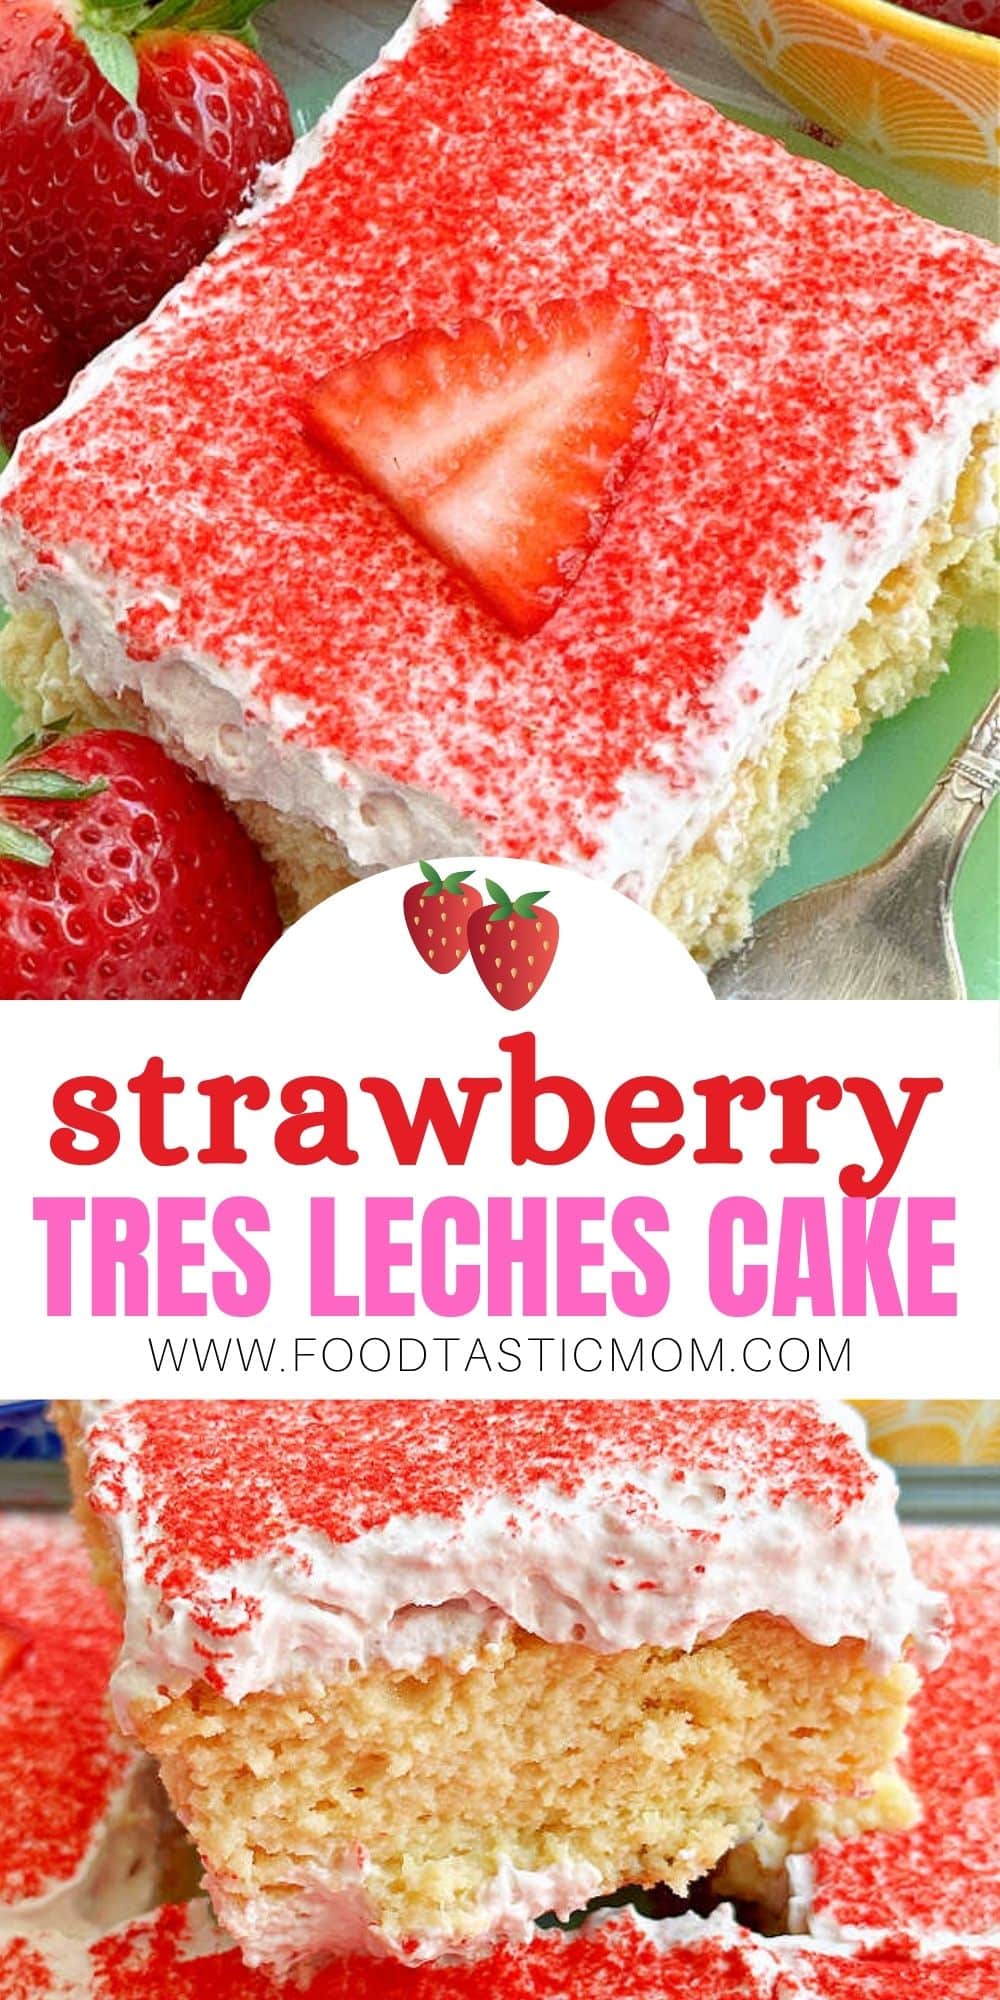 My recipe for Strawberry Tres Leches Cake includes a homemade sponge cake, three milks and three different types of strawberries. via @foodtasticmom